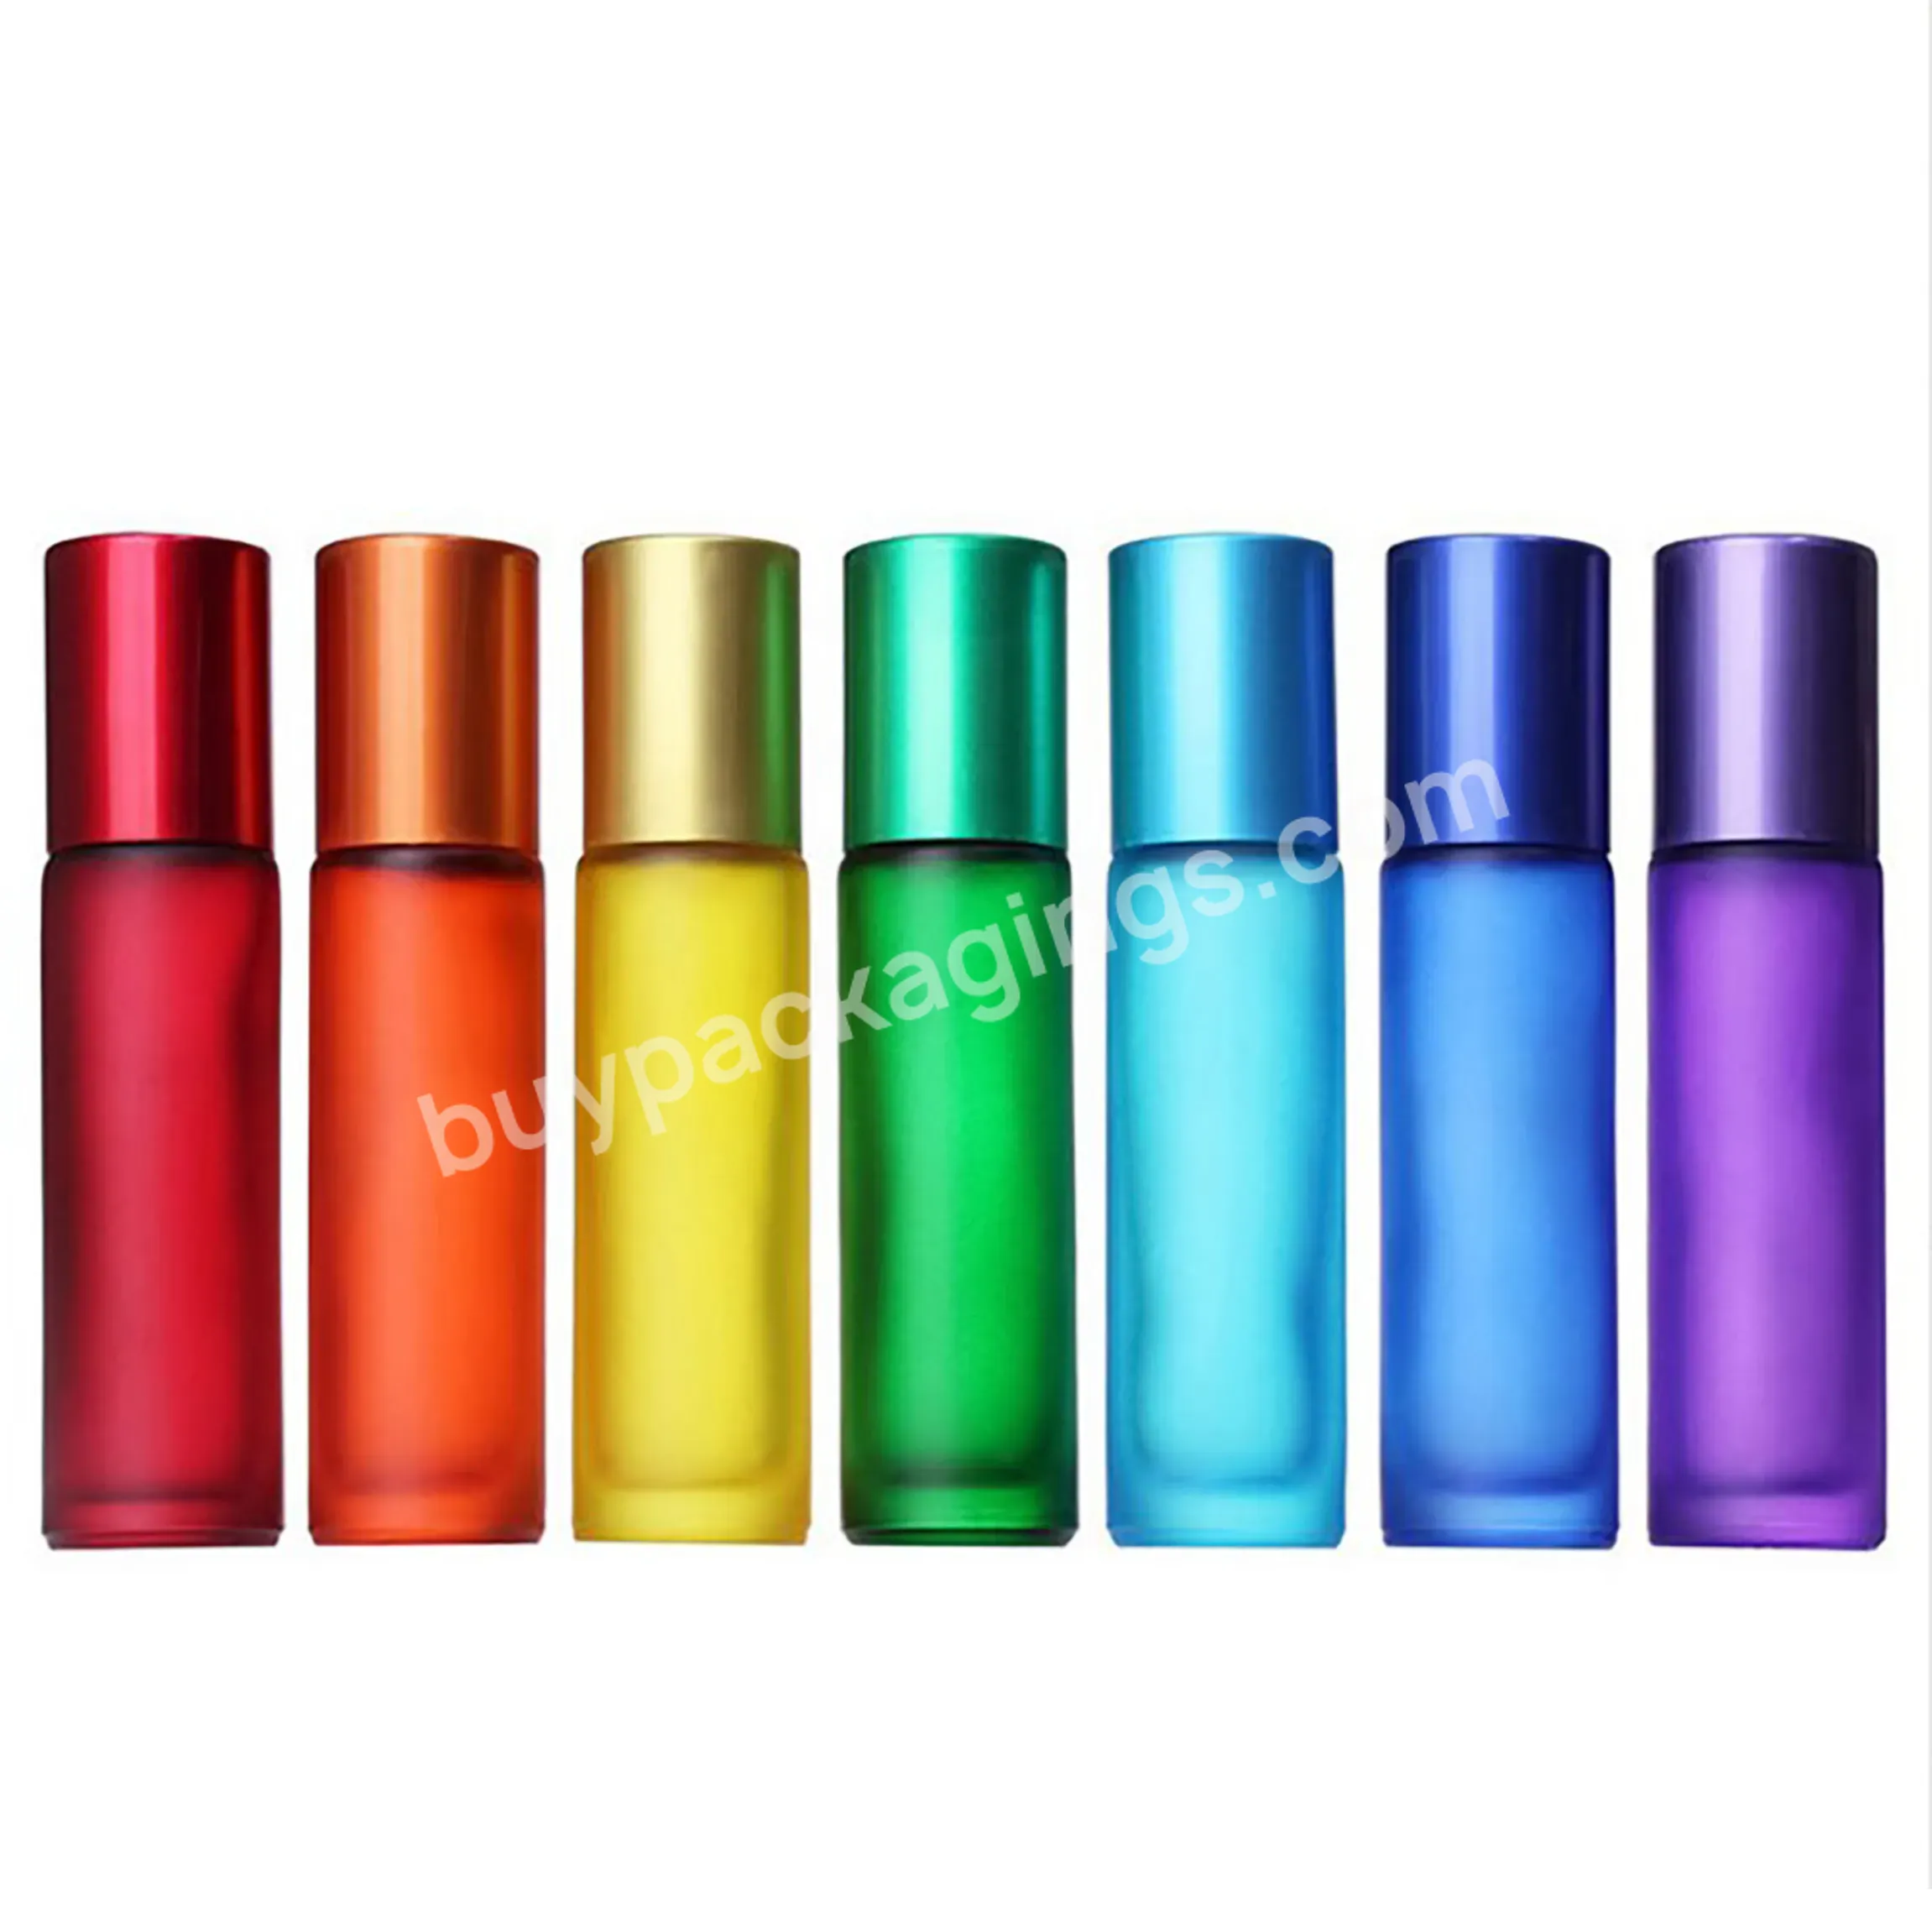 5ml 10ml Thick Bottom Cylinder Colorful Essential Oil Bottle Lip Oil Bottle With Stainless Steel Ball With Aluminum Cap - Buy 5ml 10ml Thick Bottom Cylinder Colorful Glass Ball Bottle,Essential Oil Bottle Lip Oil Travel Bottle,Bottle With Stainless S